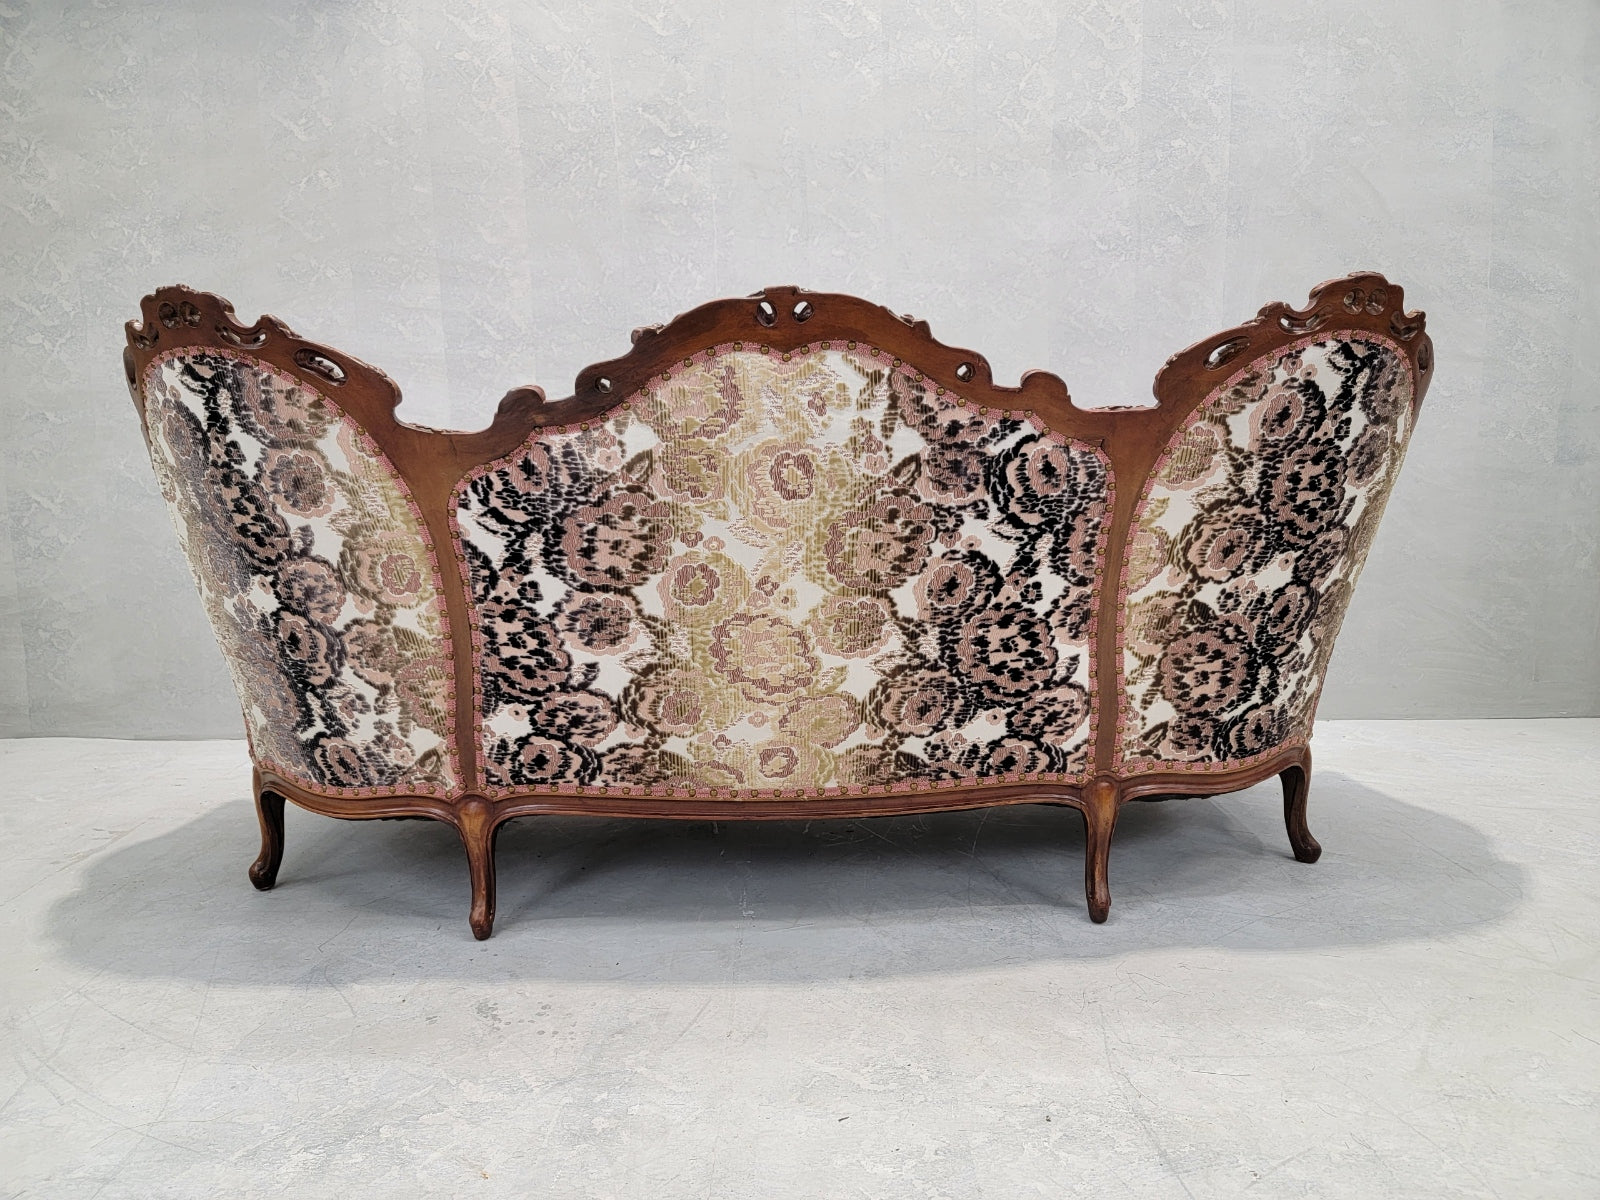 Antique Victorian French Walnut Carved Tufted Back Bergere Parlor Sofa Newly Upholstered in Velvet with Patterned Mohair Back